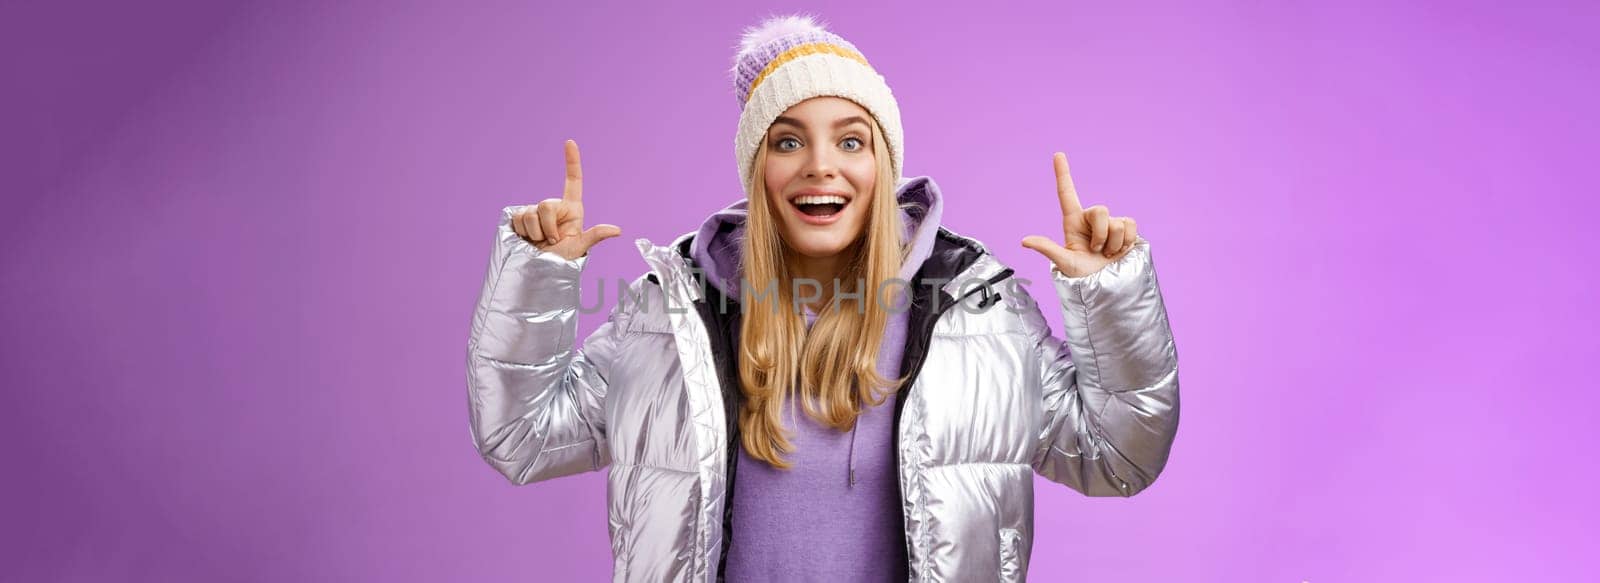 Excited carefree cheerful fair-haired european girl in silver jacket winter hat raising hands pointing up have excellent idea smiling broadly speaking passionately standing purple background by Benzoix